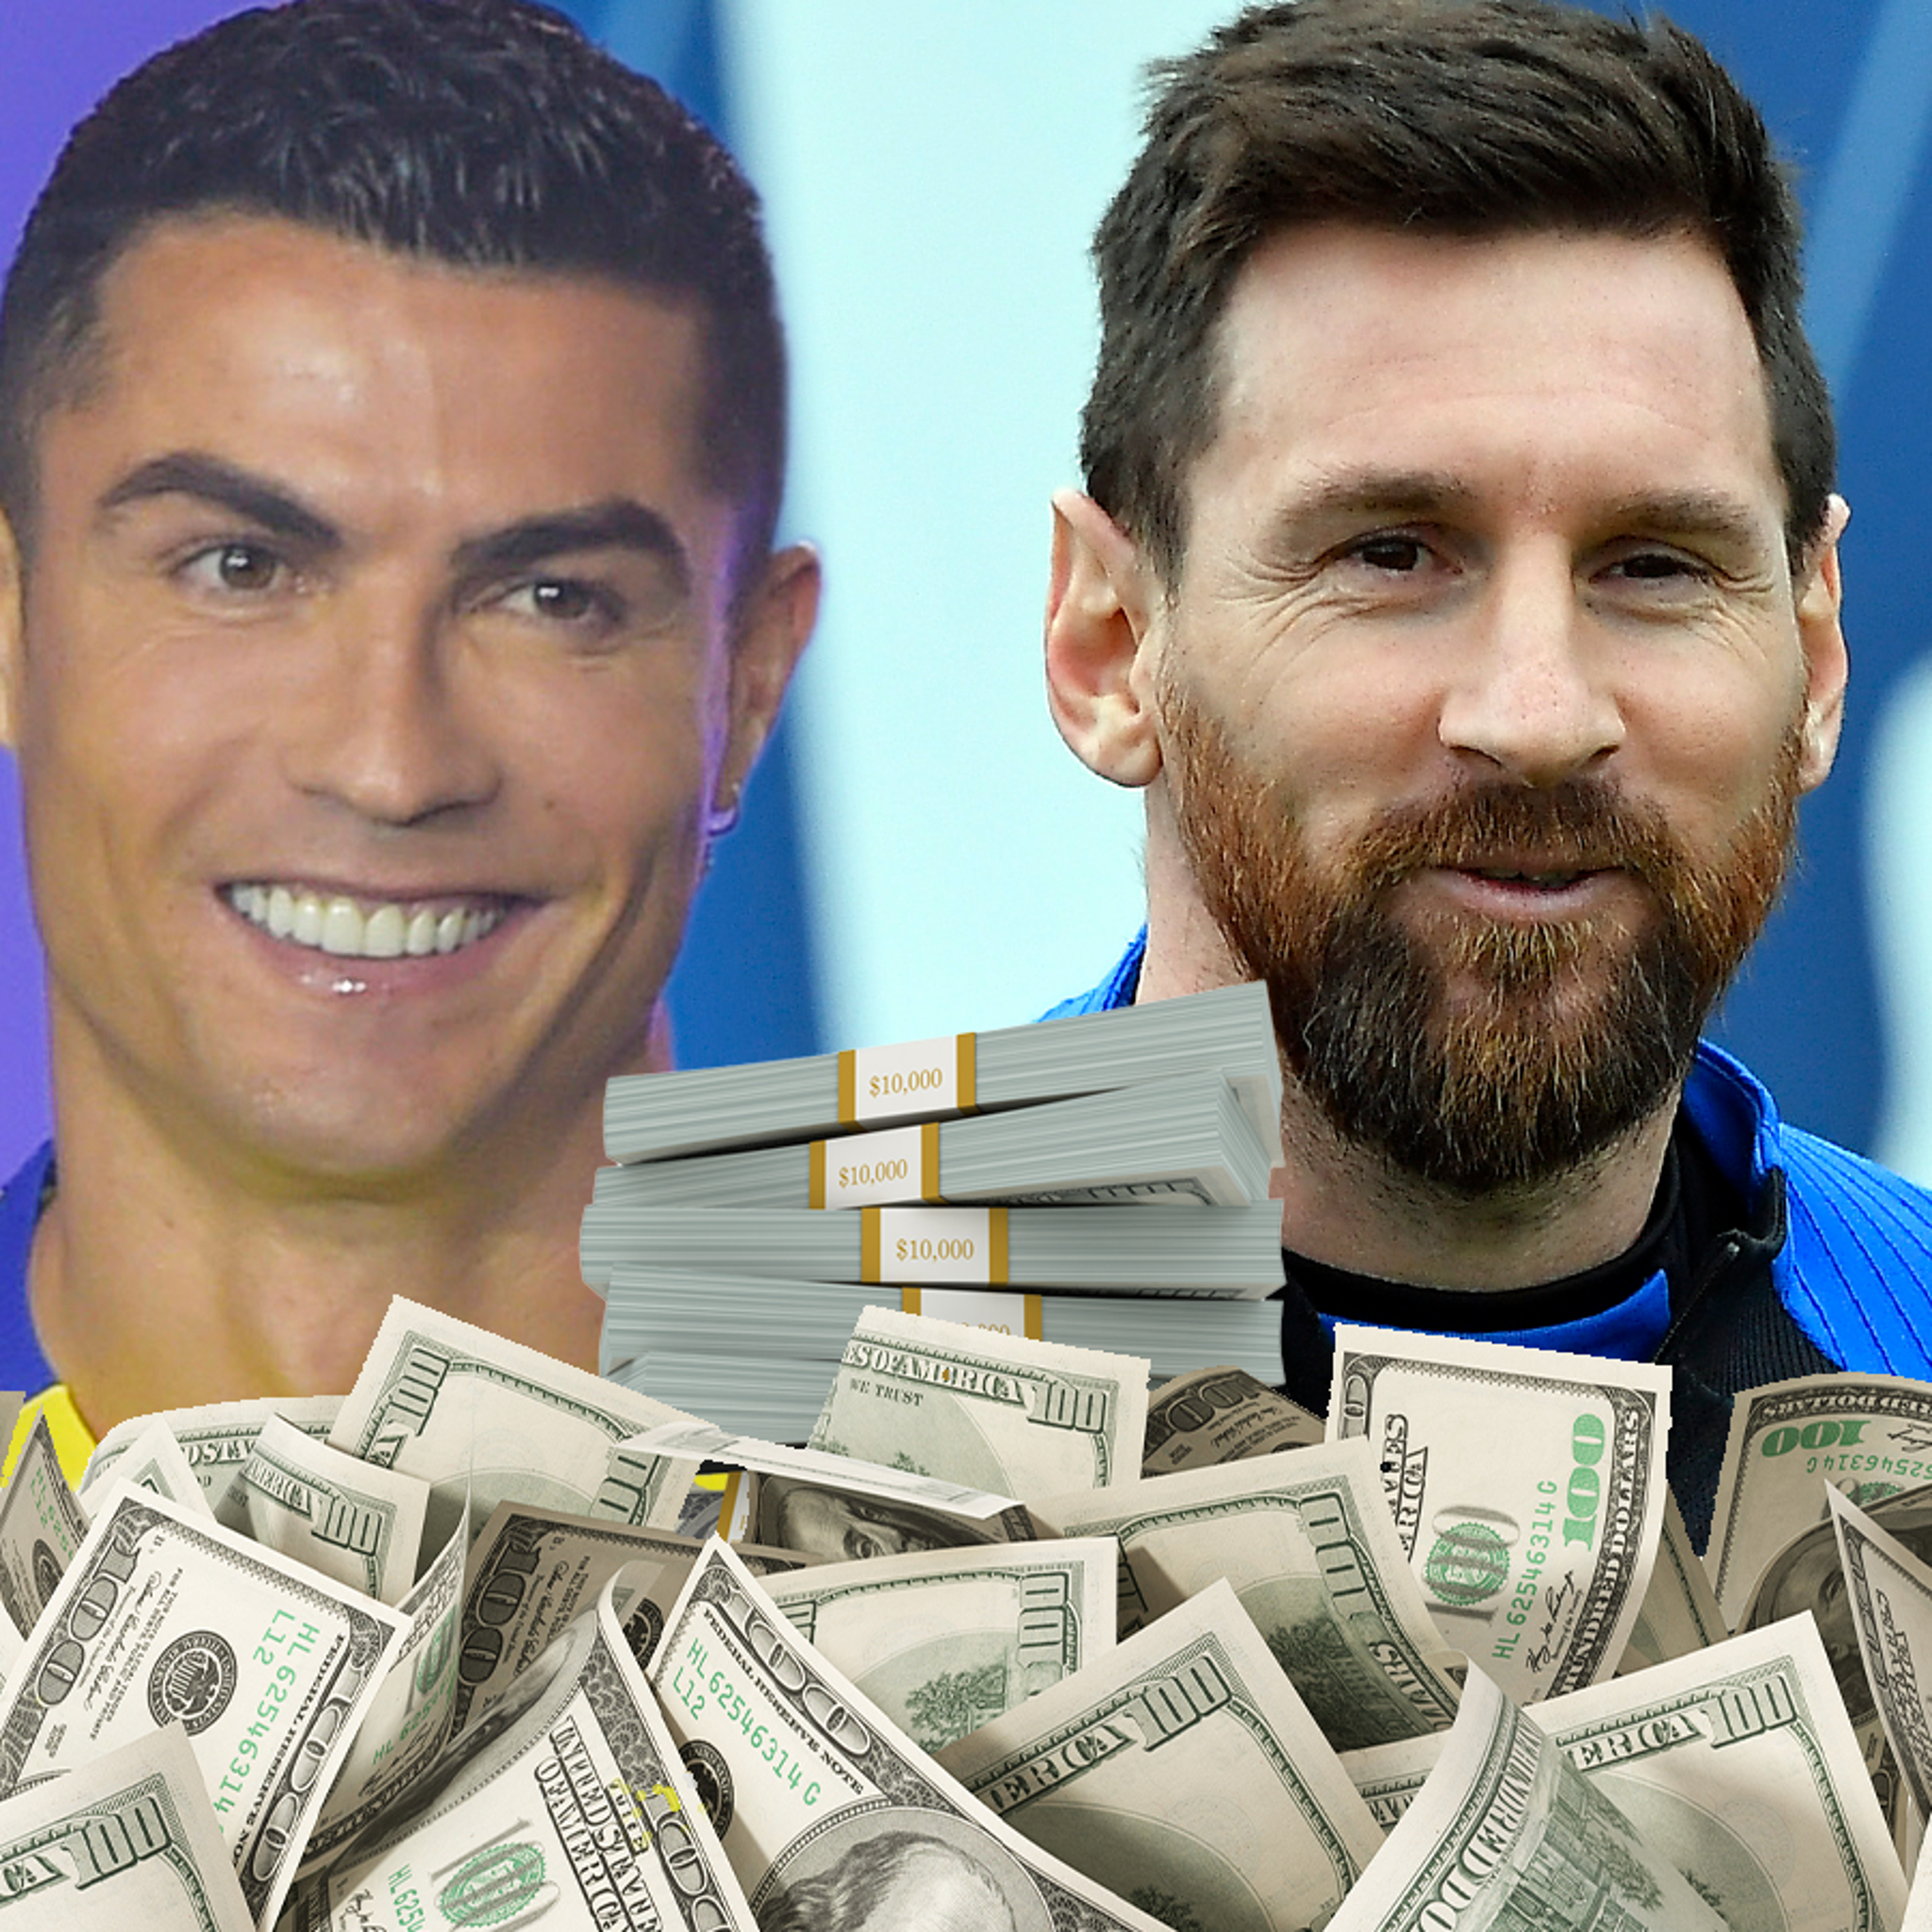 What is the ticket price for the Ronaldo vs Messi match on January 19? -  Sportstar